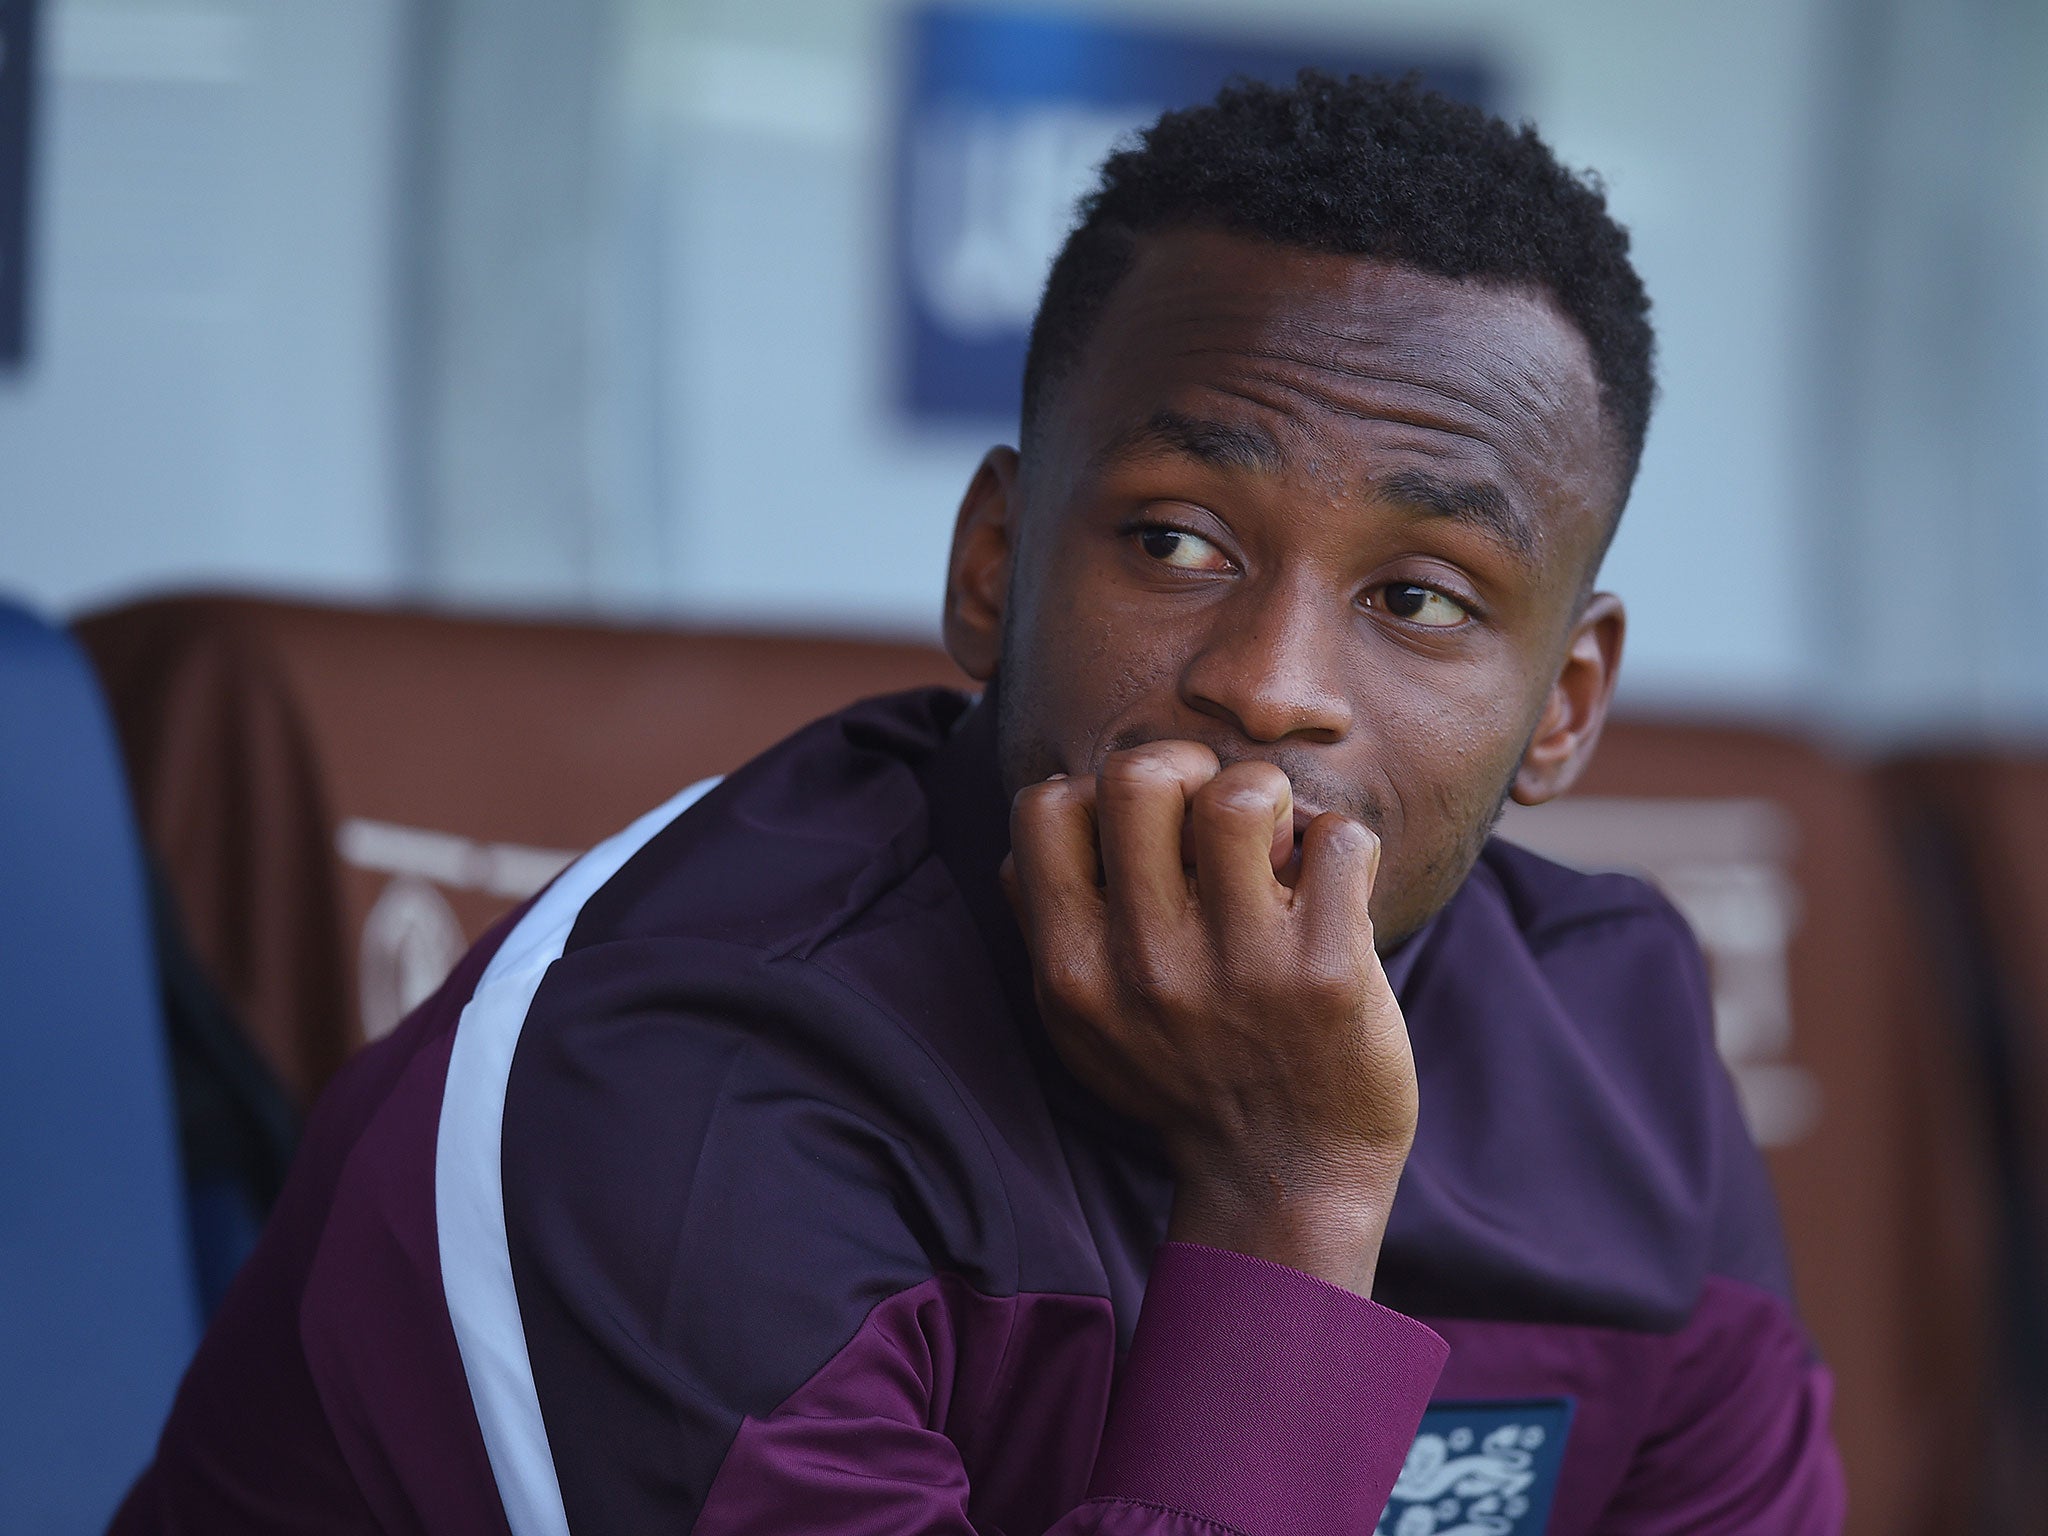 Saido Berahino tweeted this week that he would not play for West Brom again